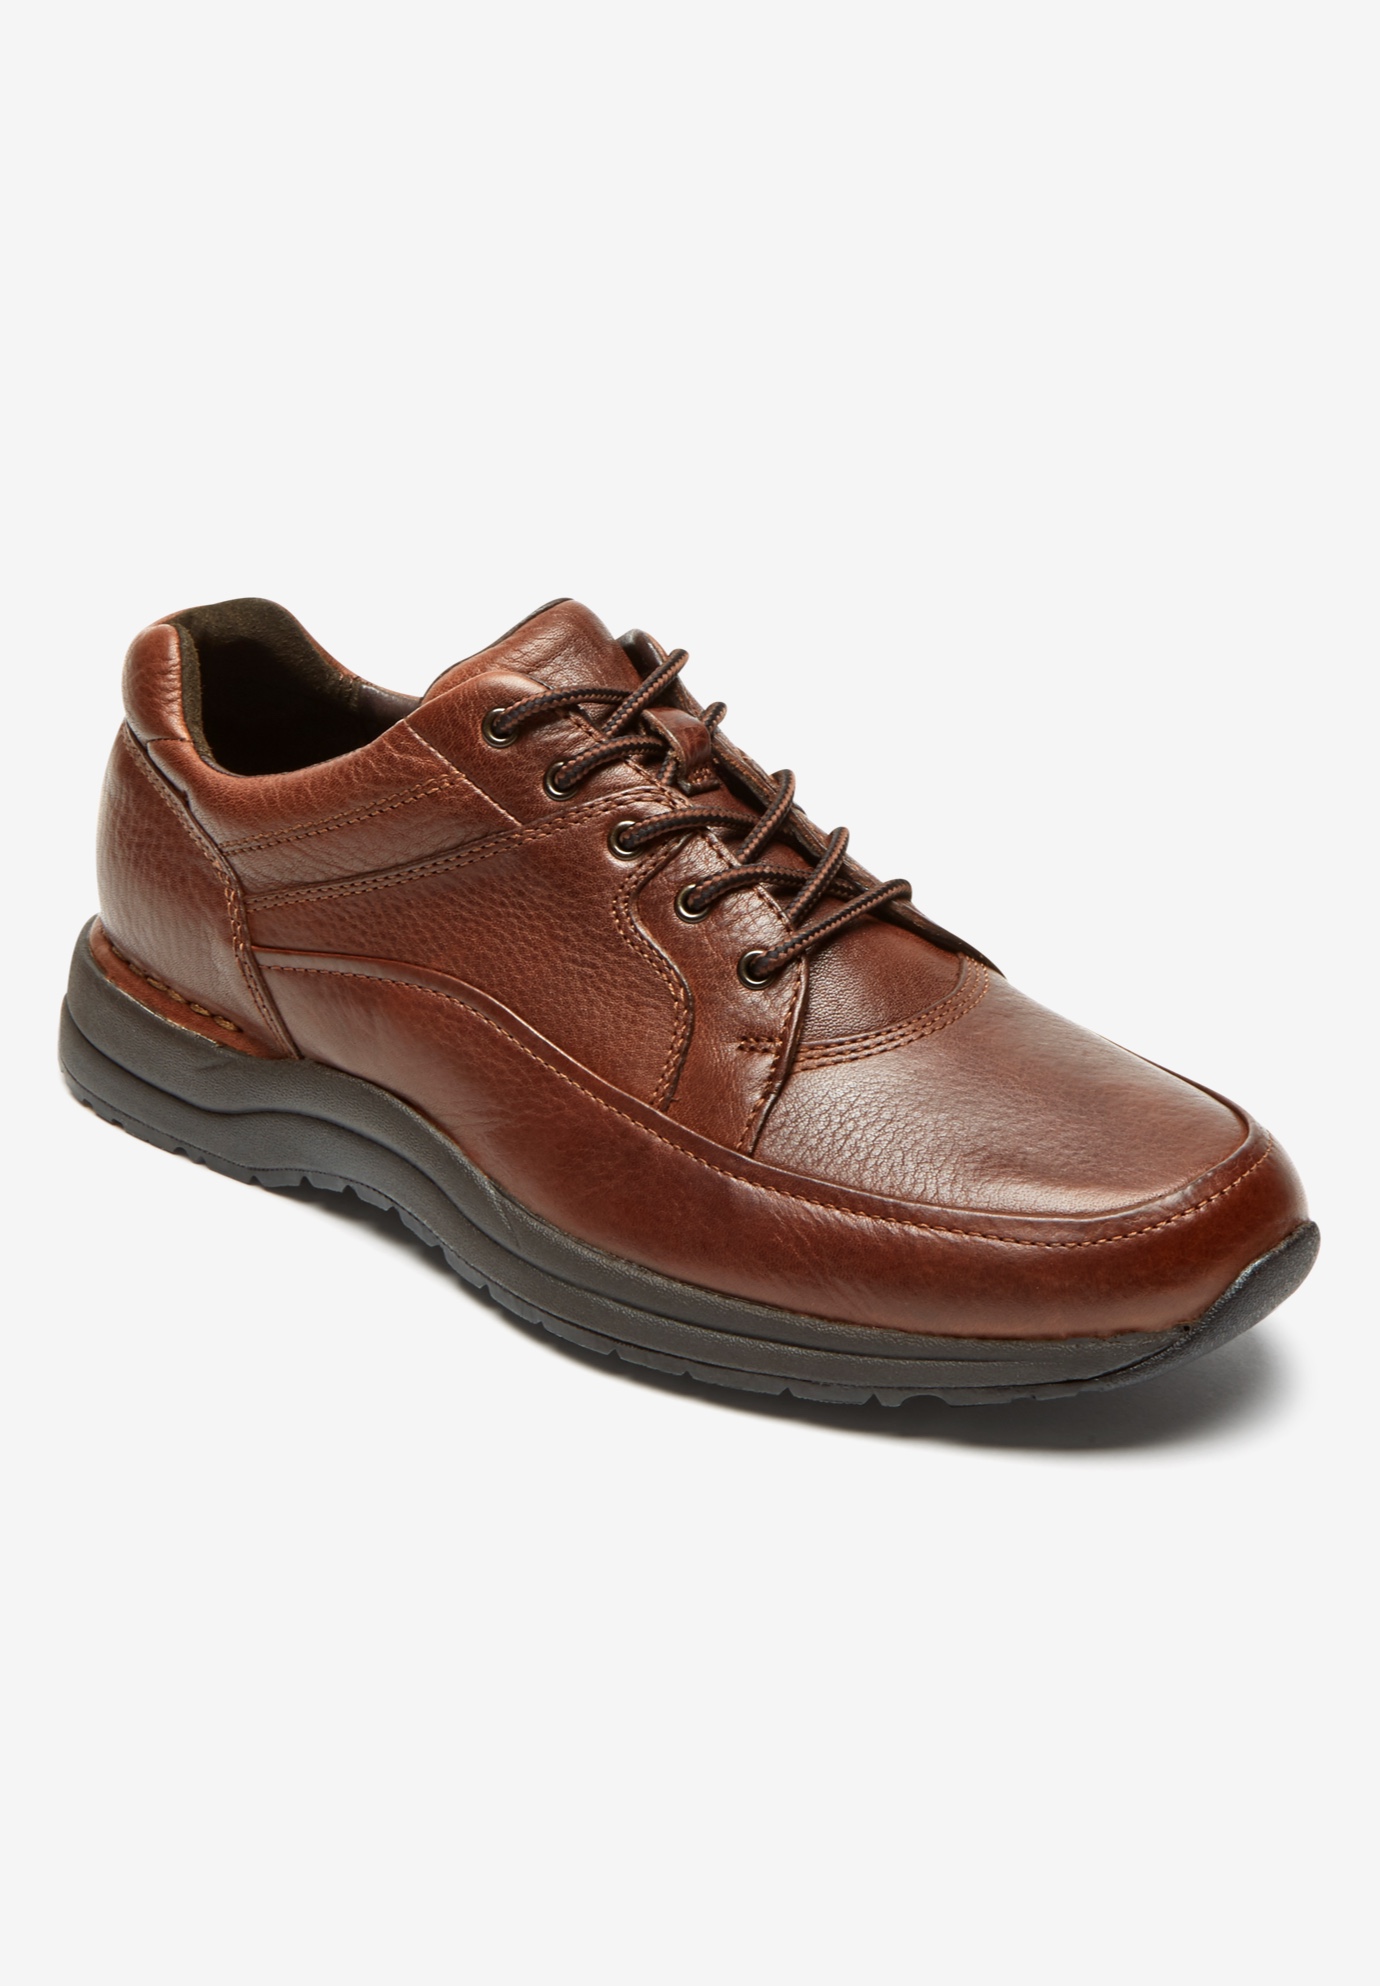 Path to Change Edge Hill Casual Walking Shoes, 